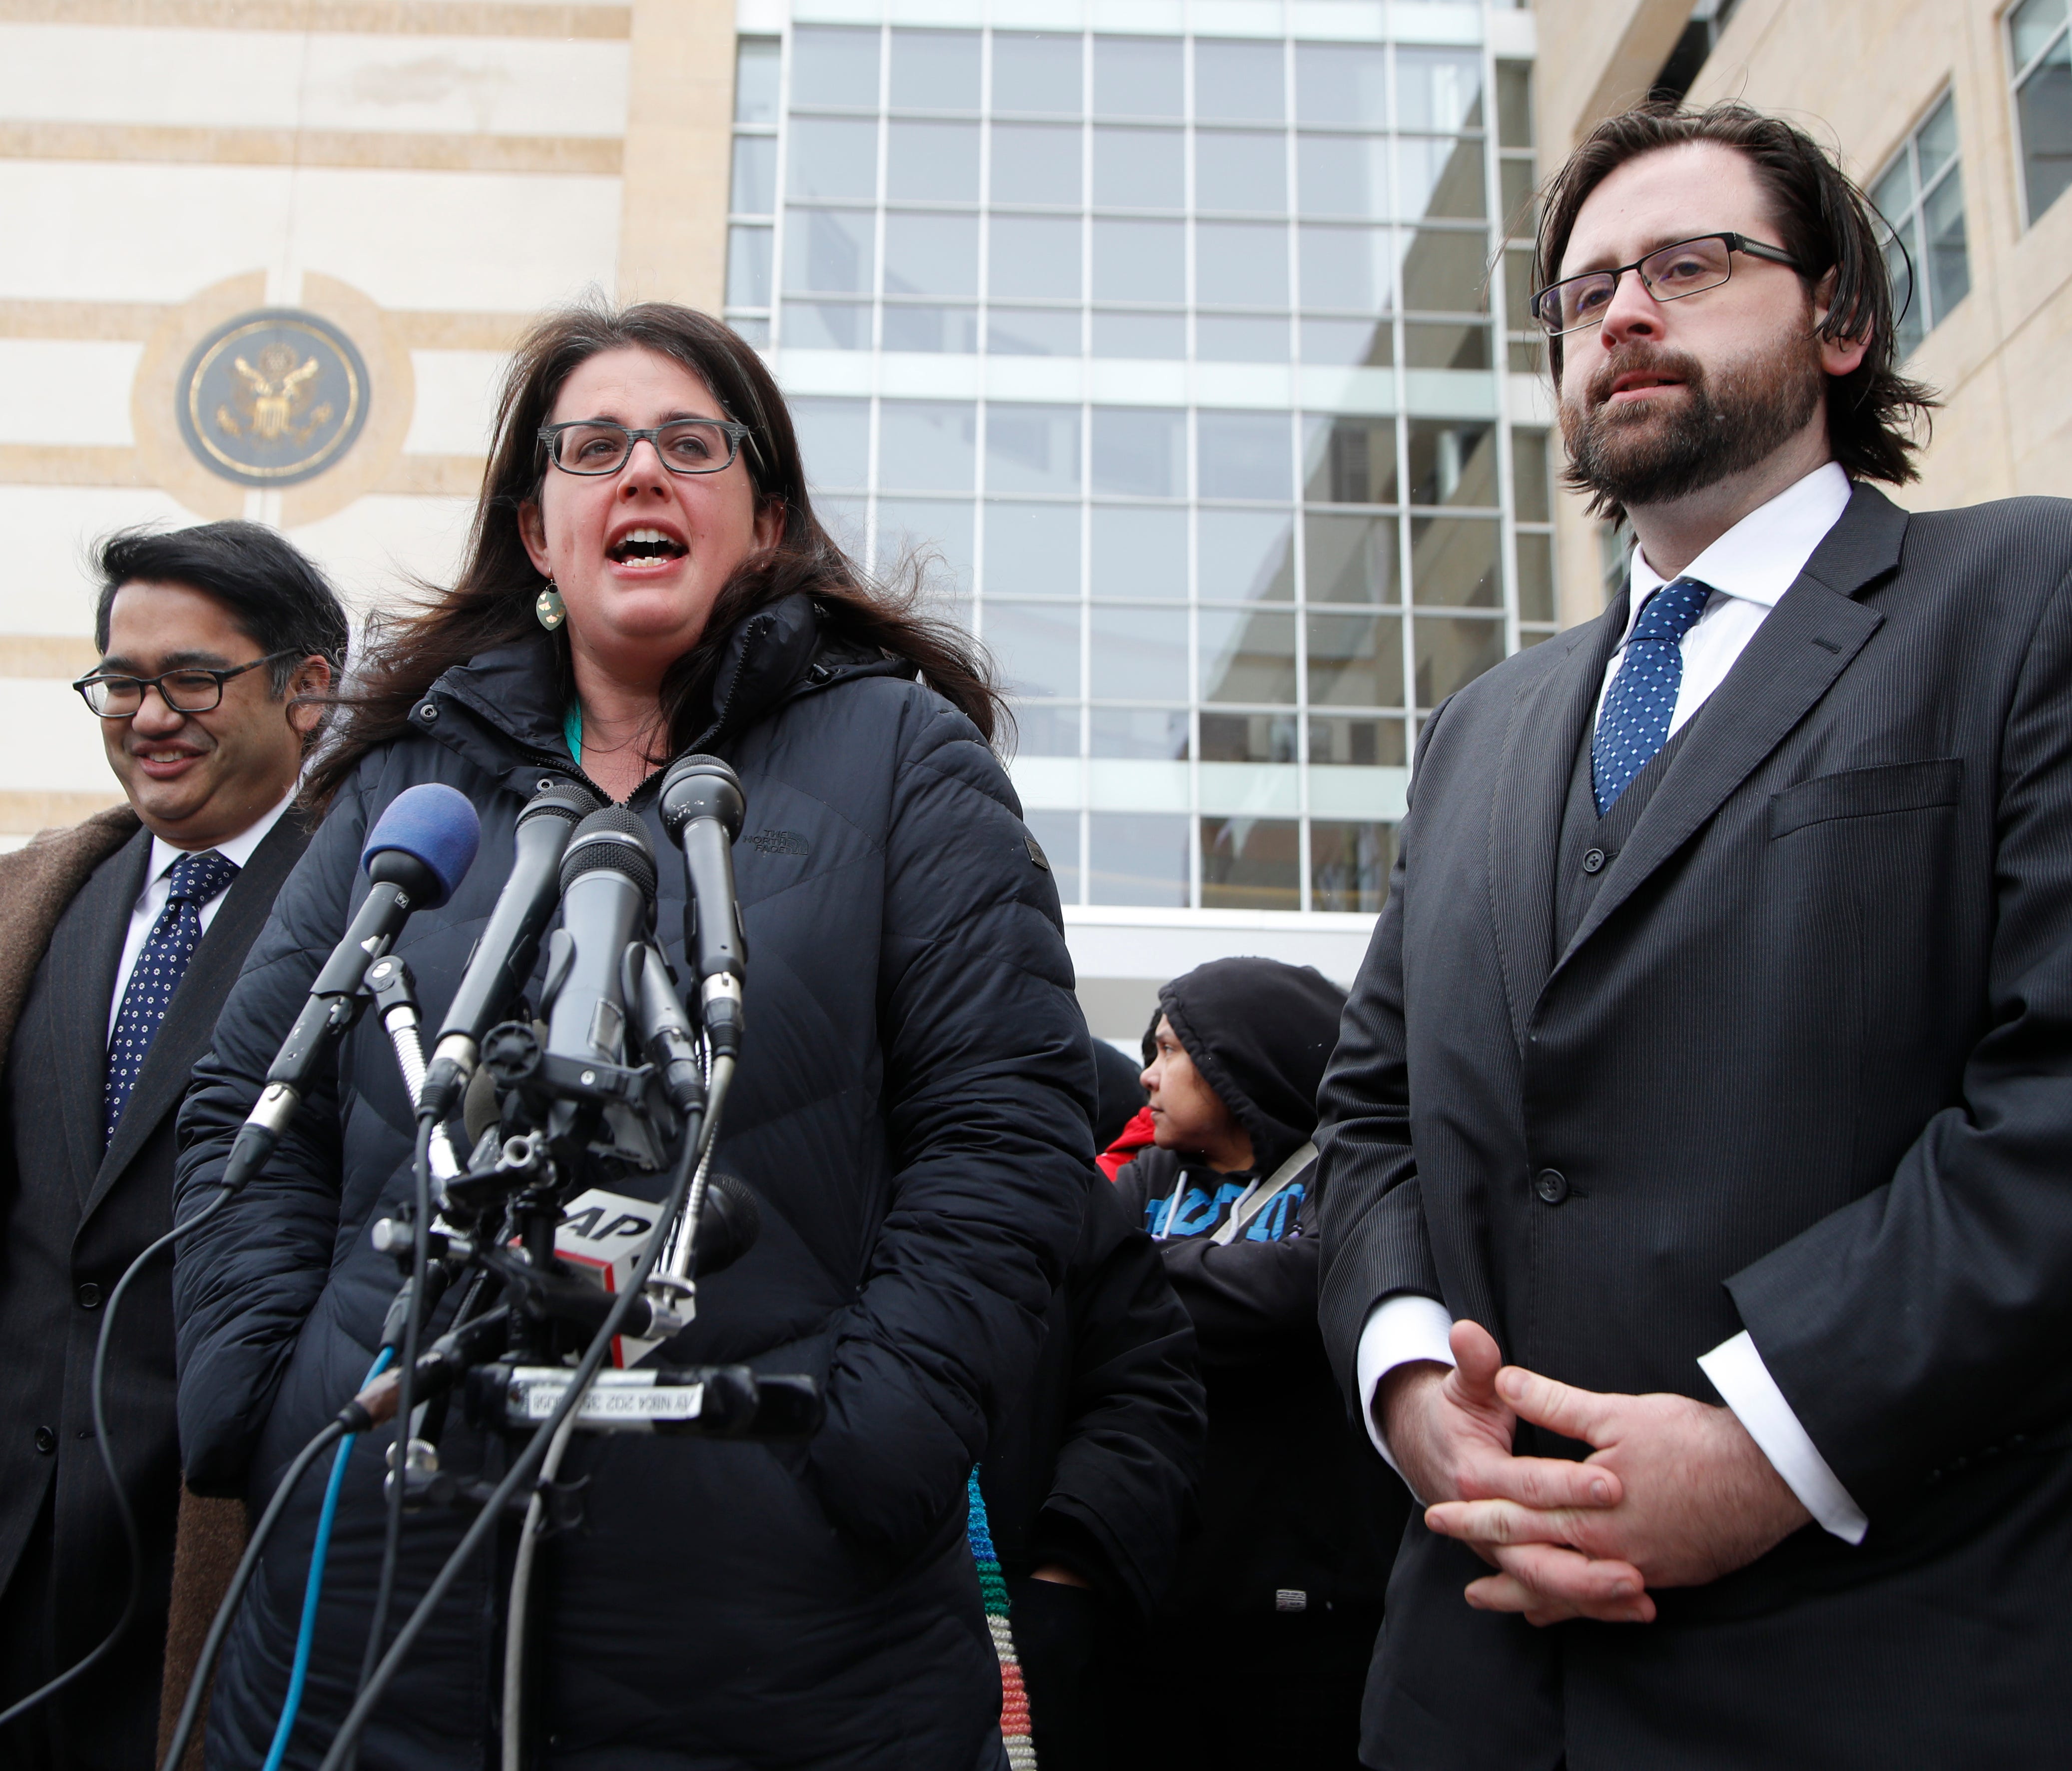 Becca Heller of the International Refugee Assistance Project speaks to reporters outside federal court in Beltsville, Md., on March 15, 2017, about a challenge to President Trump's revised travel ban.